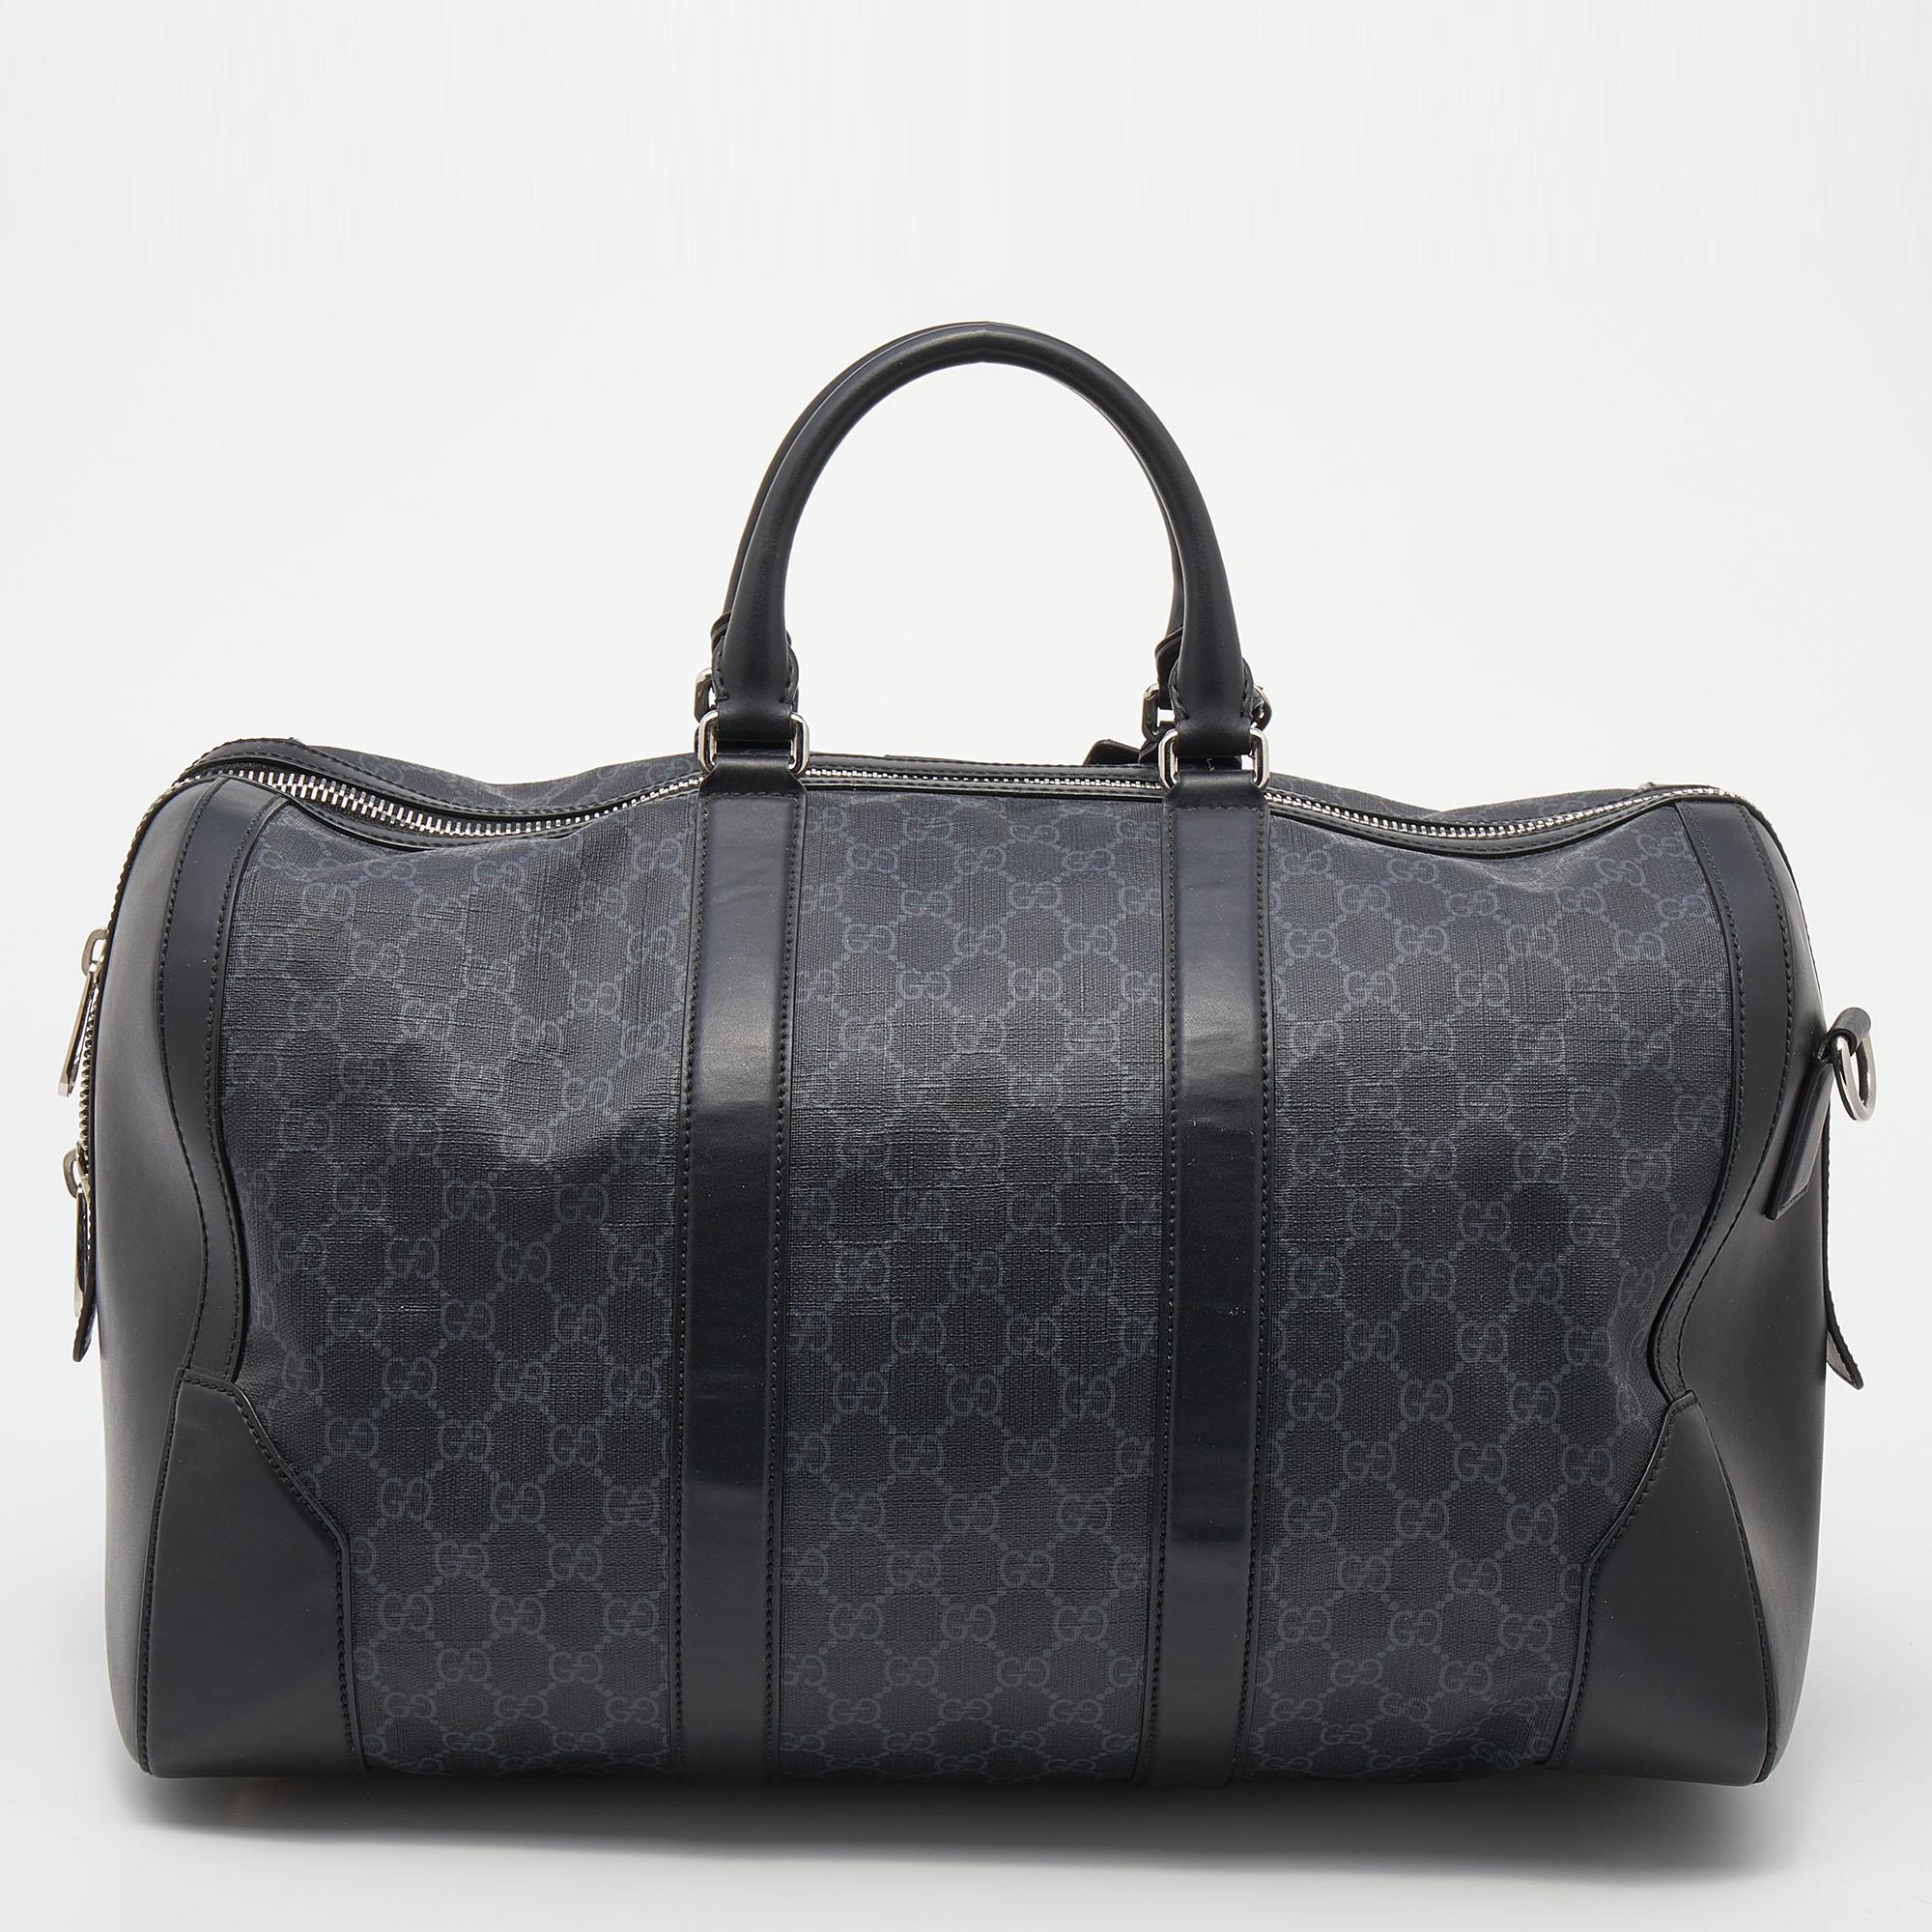 Creations like this Carry On duffle bag by Gucci never go out of style. This bag is crafted from GG Supreme canvas with details of matching leather trims, and it features dual handles and a detachable Web shoulder strap. The top zipper opens to a